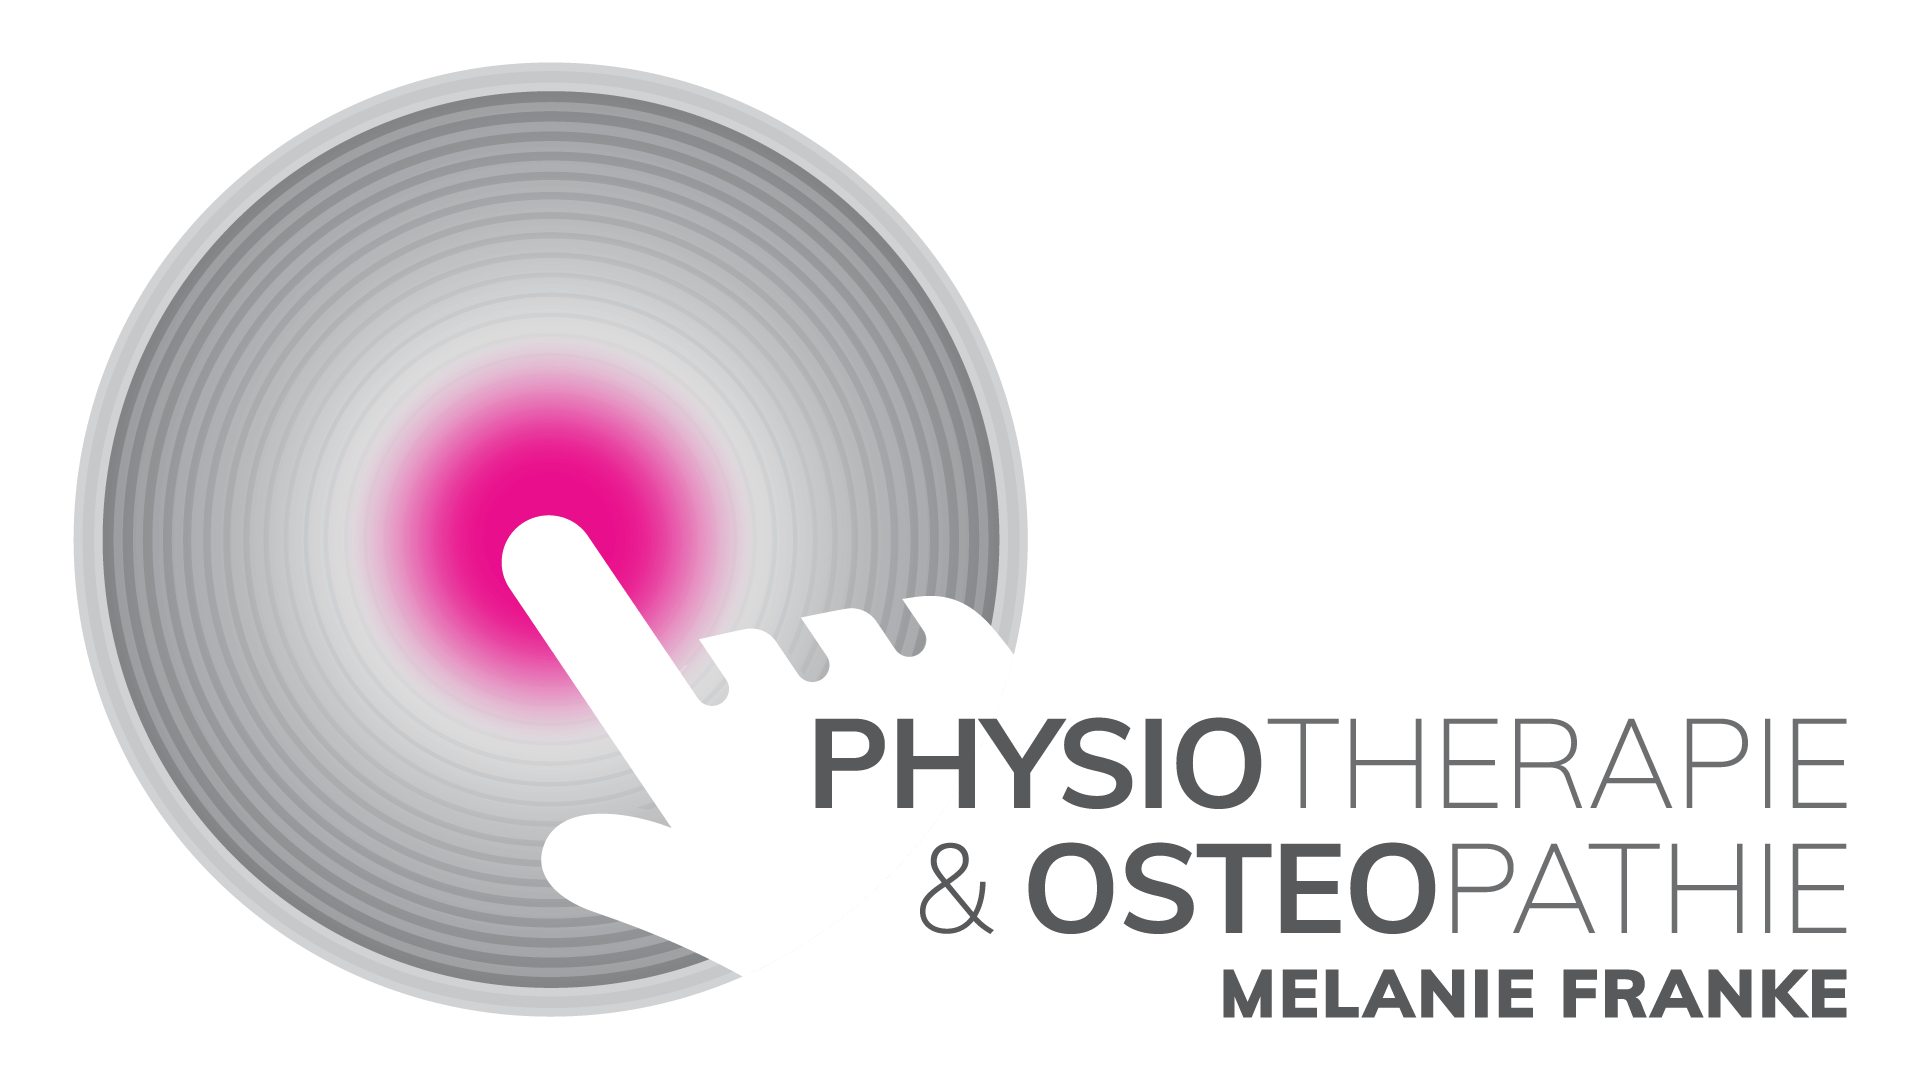 mga Physiotherapie & Osteopathie